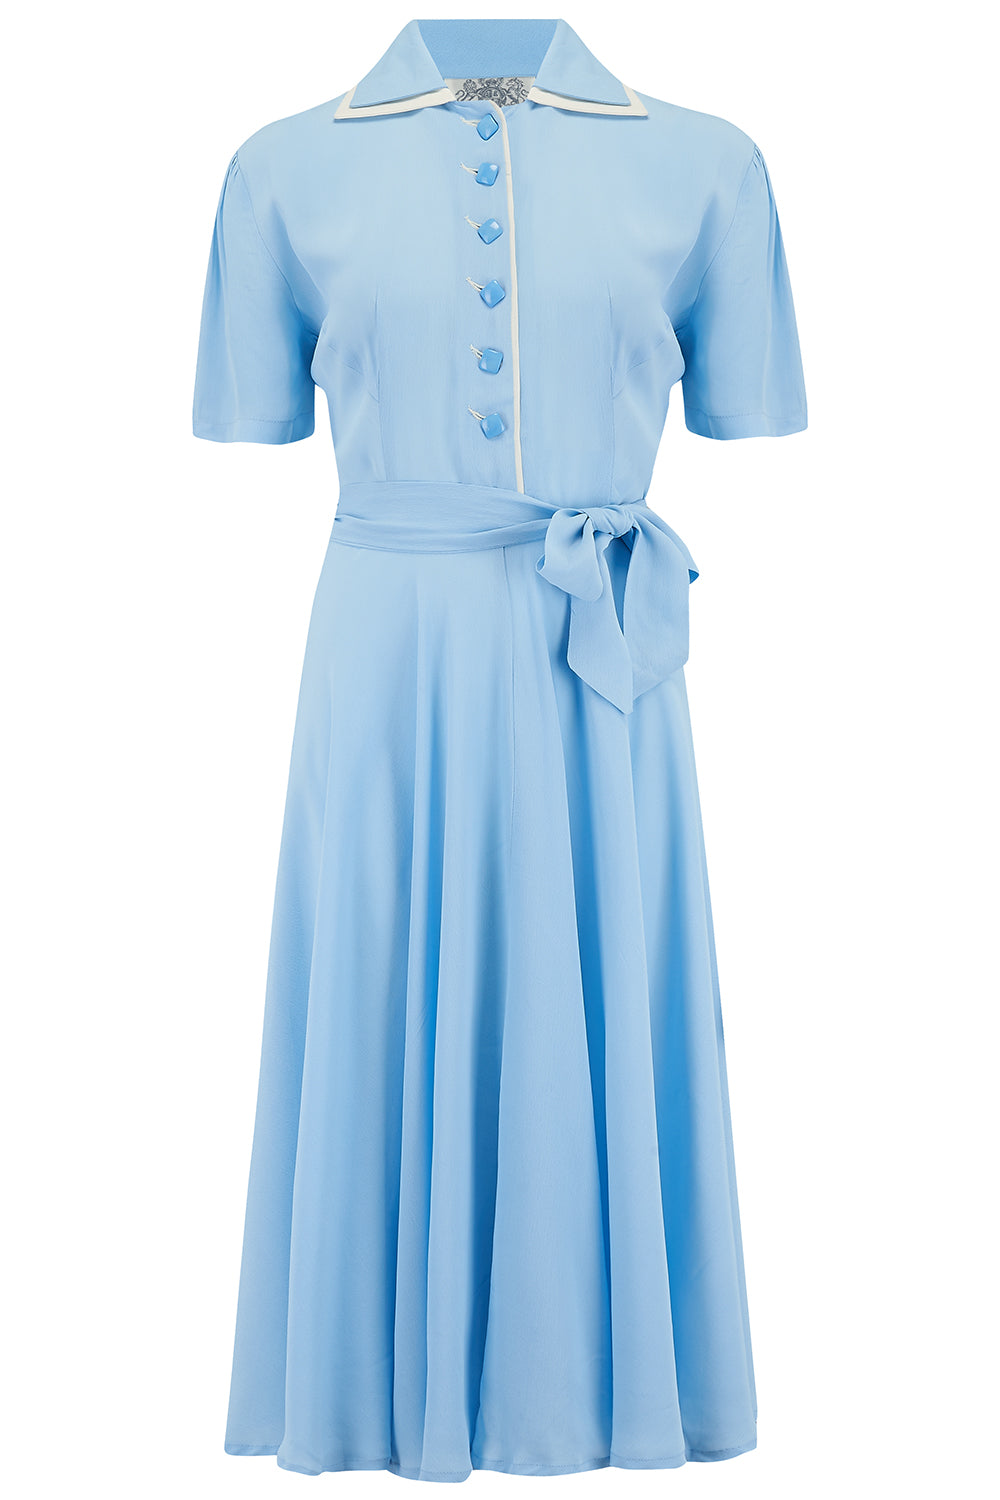 "Mae" Tea Dress in Powder Blue with Cream Contrasts, Classic 1940s Vintage Style - CC41, Goodwood Revival, Twinwood Festival, Viva Las Vegas Rockabilly Weekend Rock n Romance The Seamstress of Bloomsbury